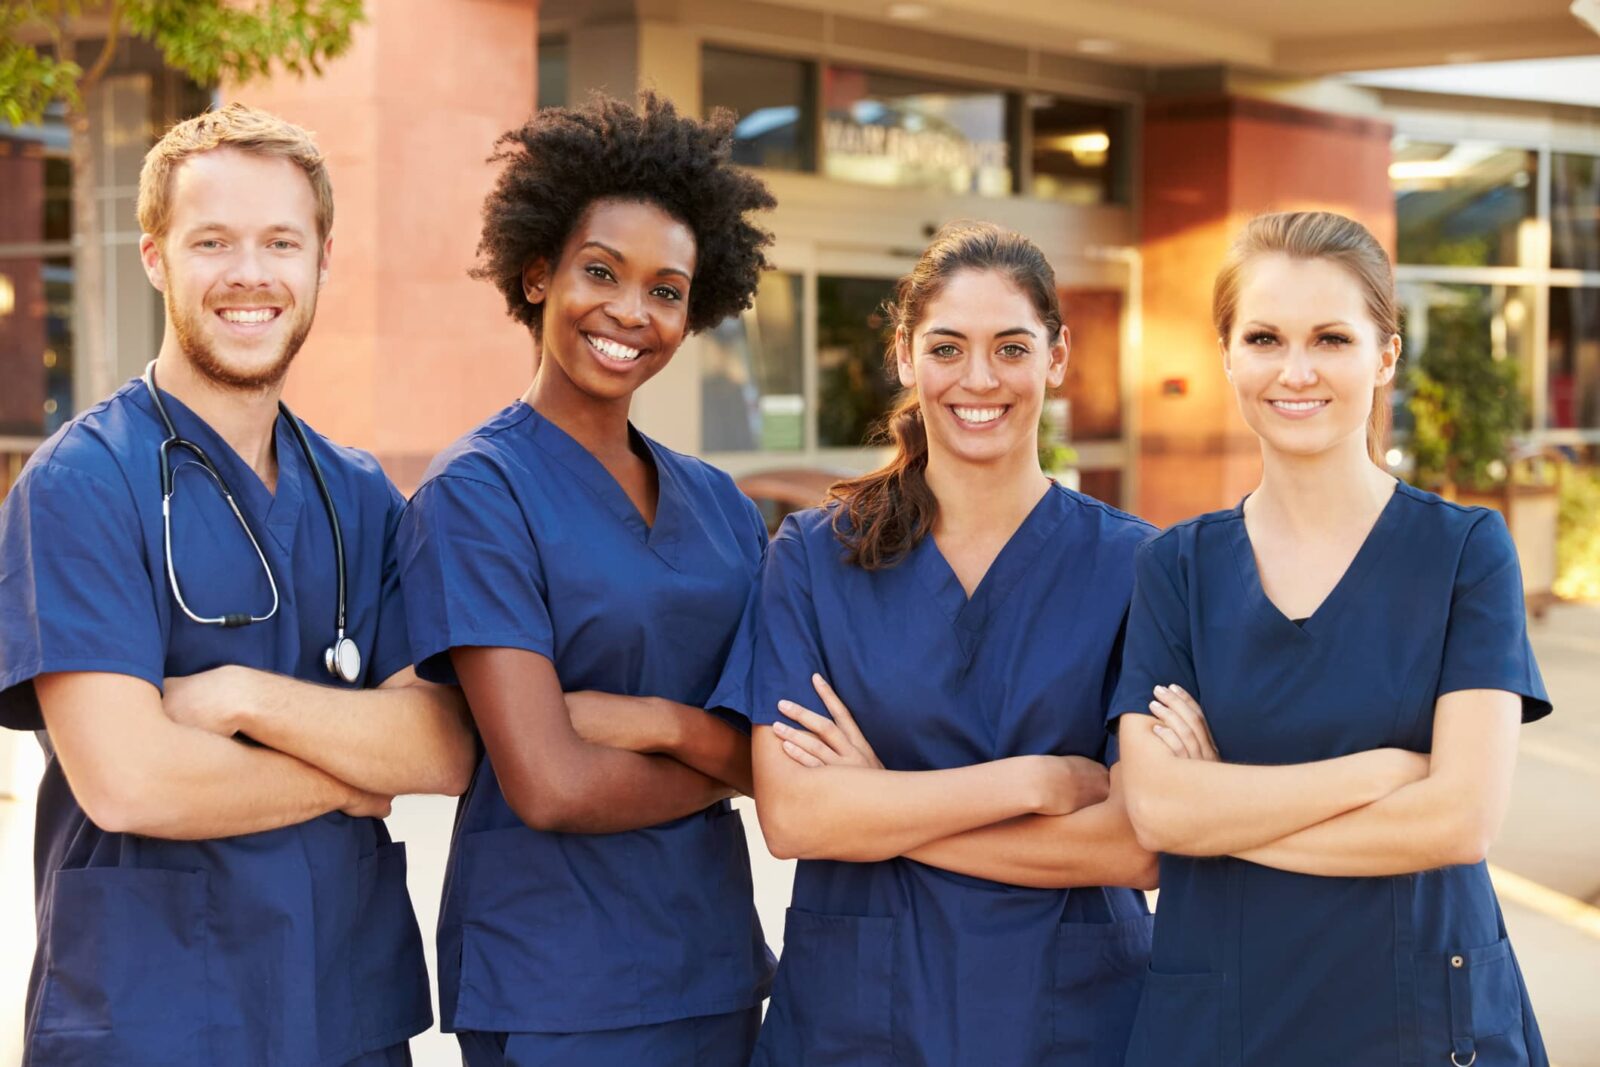 Nursing Career With Travel Opportunities in Texas